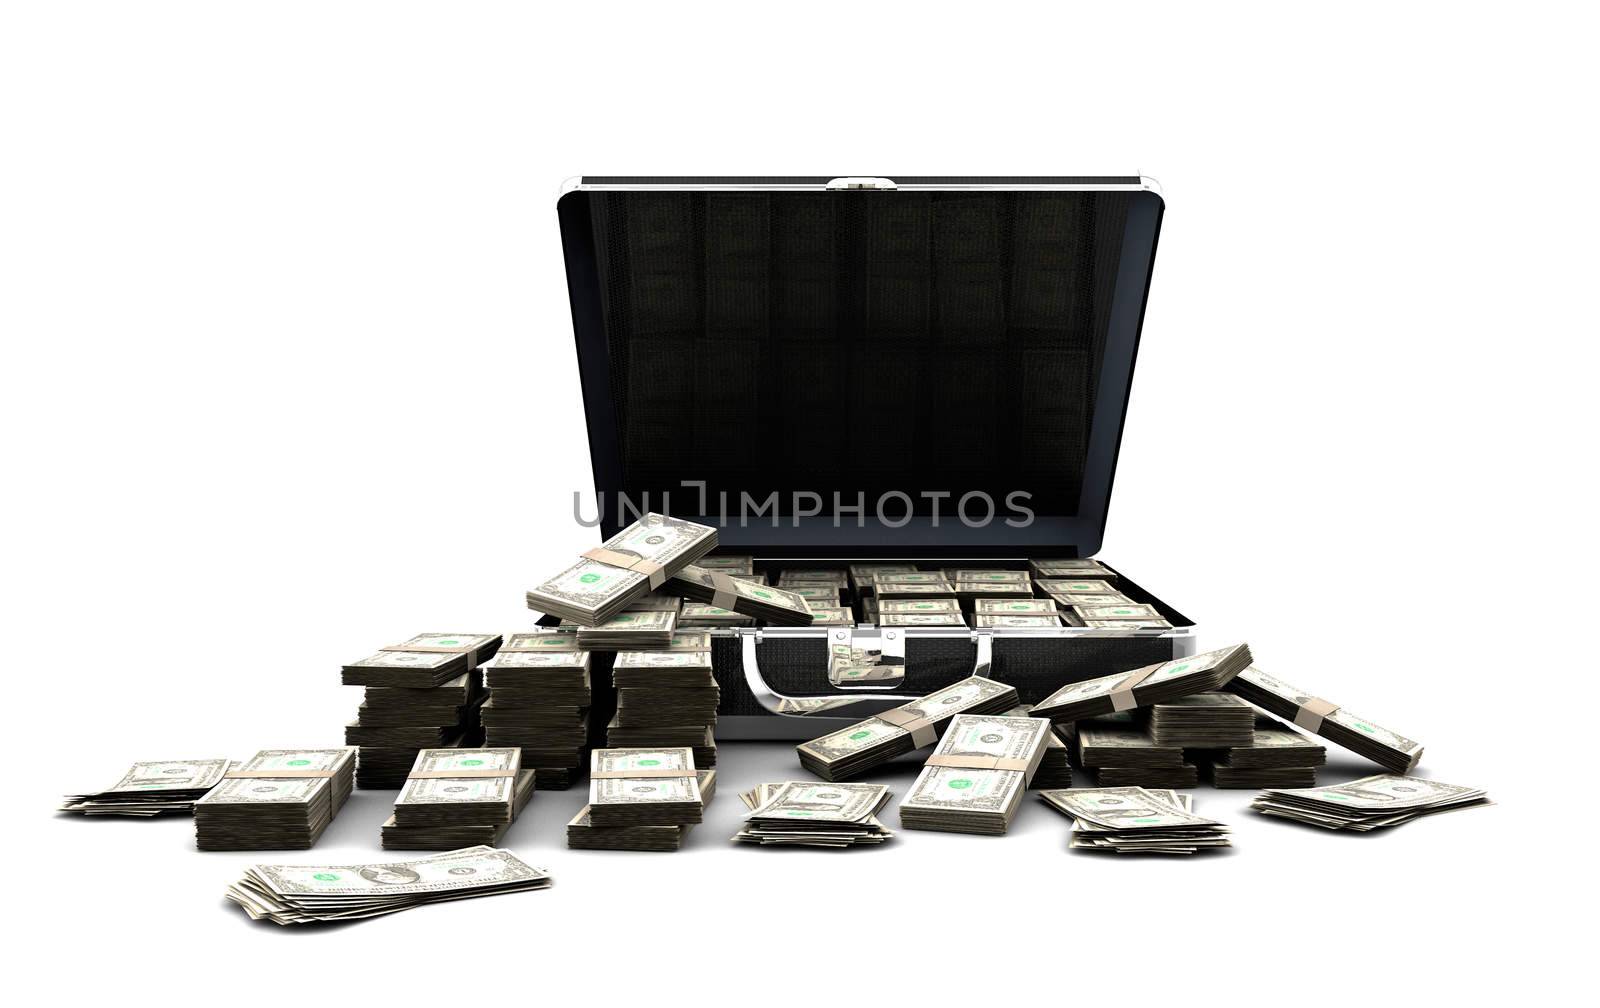 Briefcase full of money by dynamicfoto